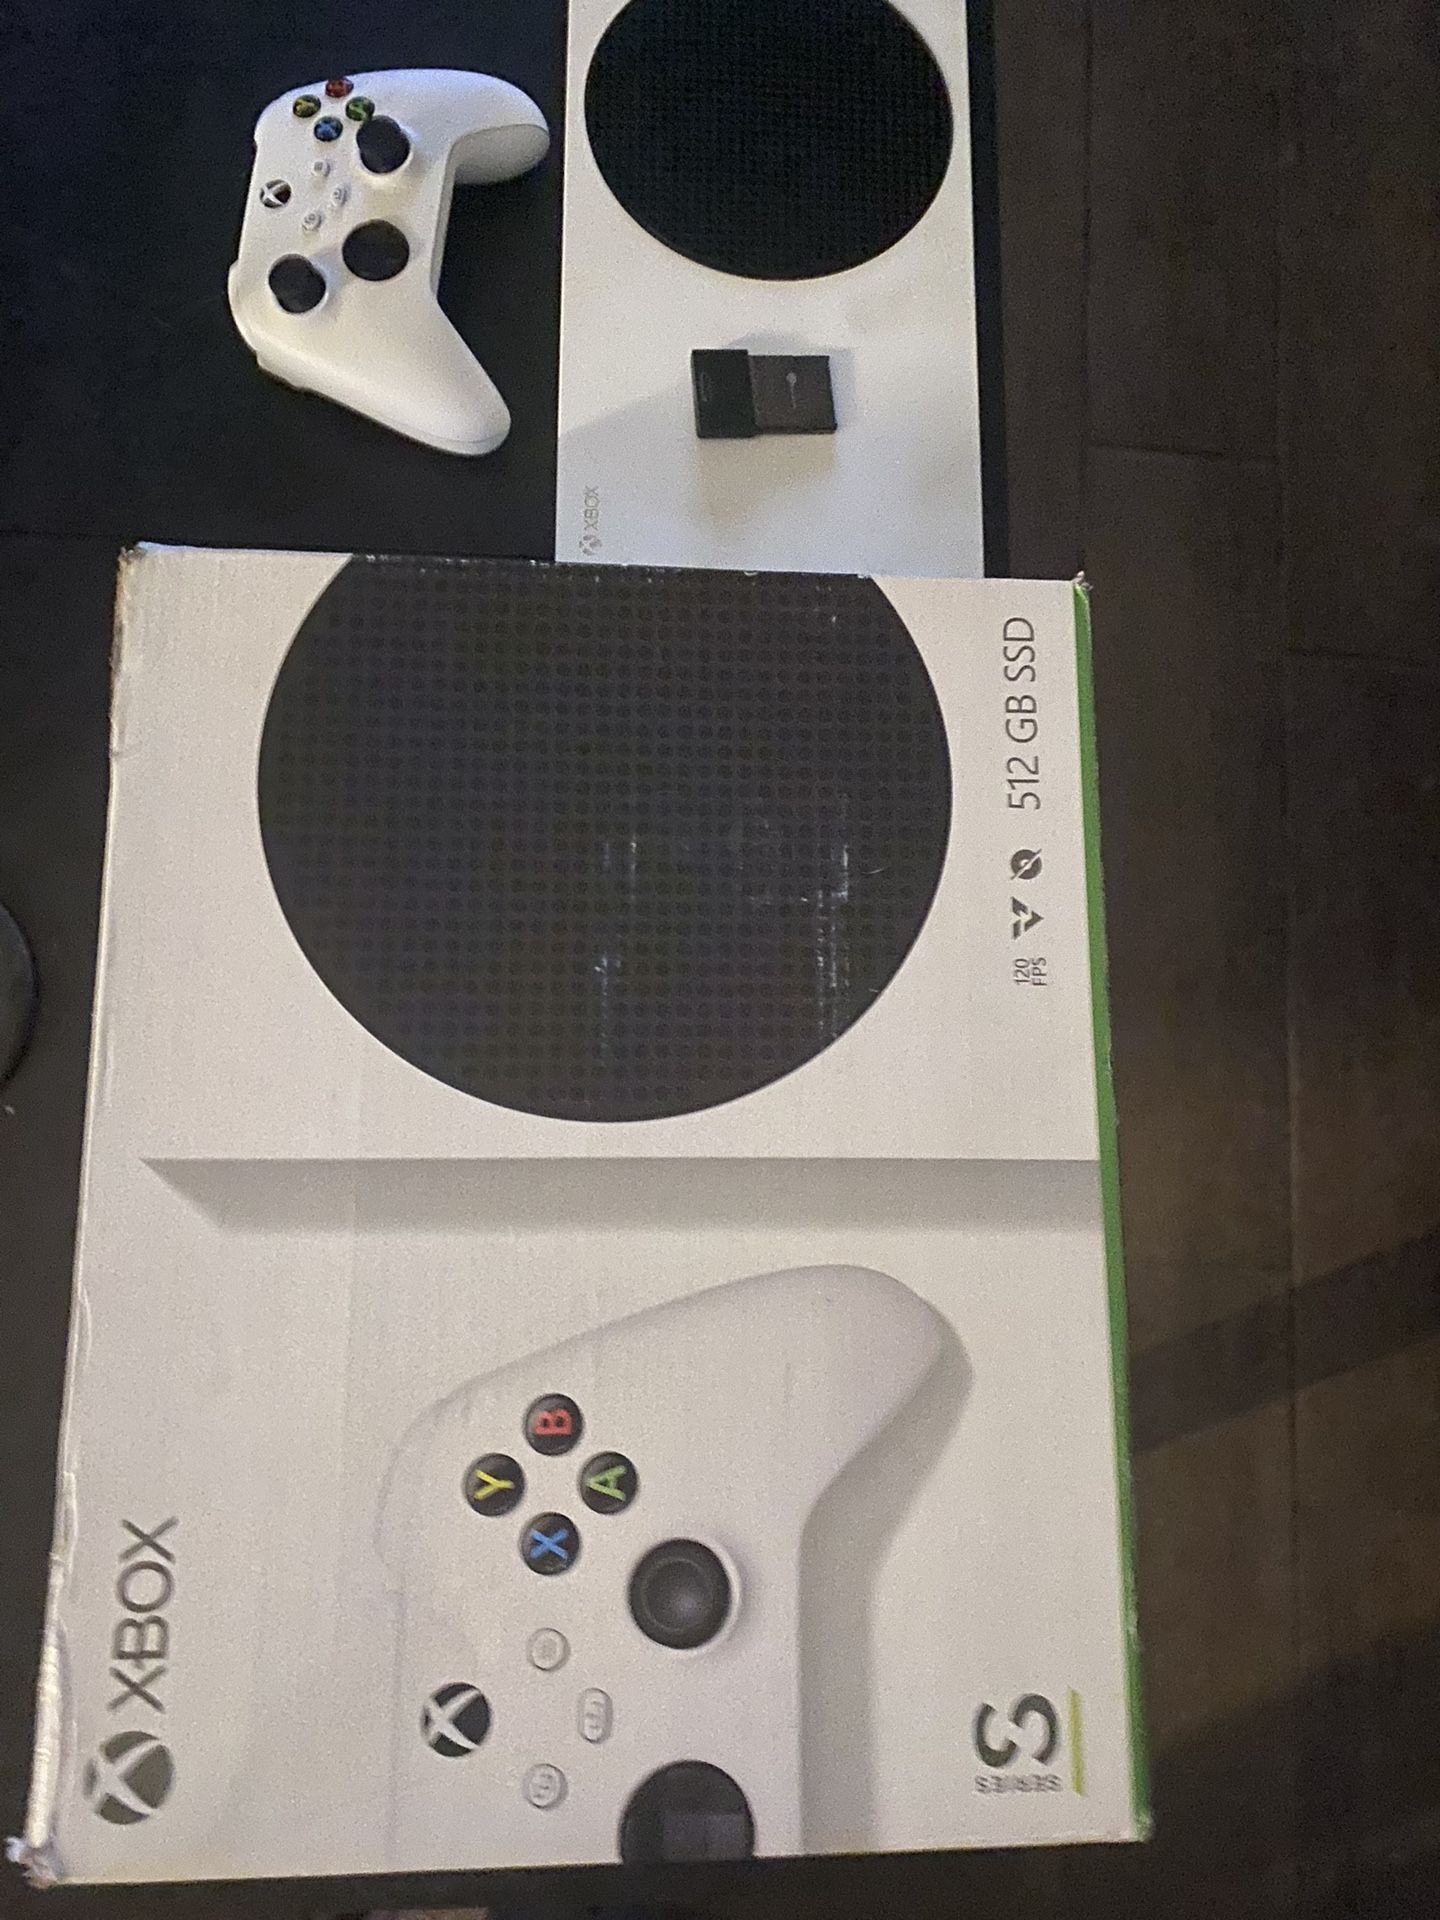 Xbox Series S 512 GB With 2 Controllers, Sea gate 1 TB Storage